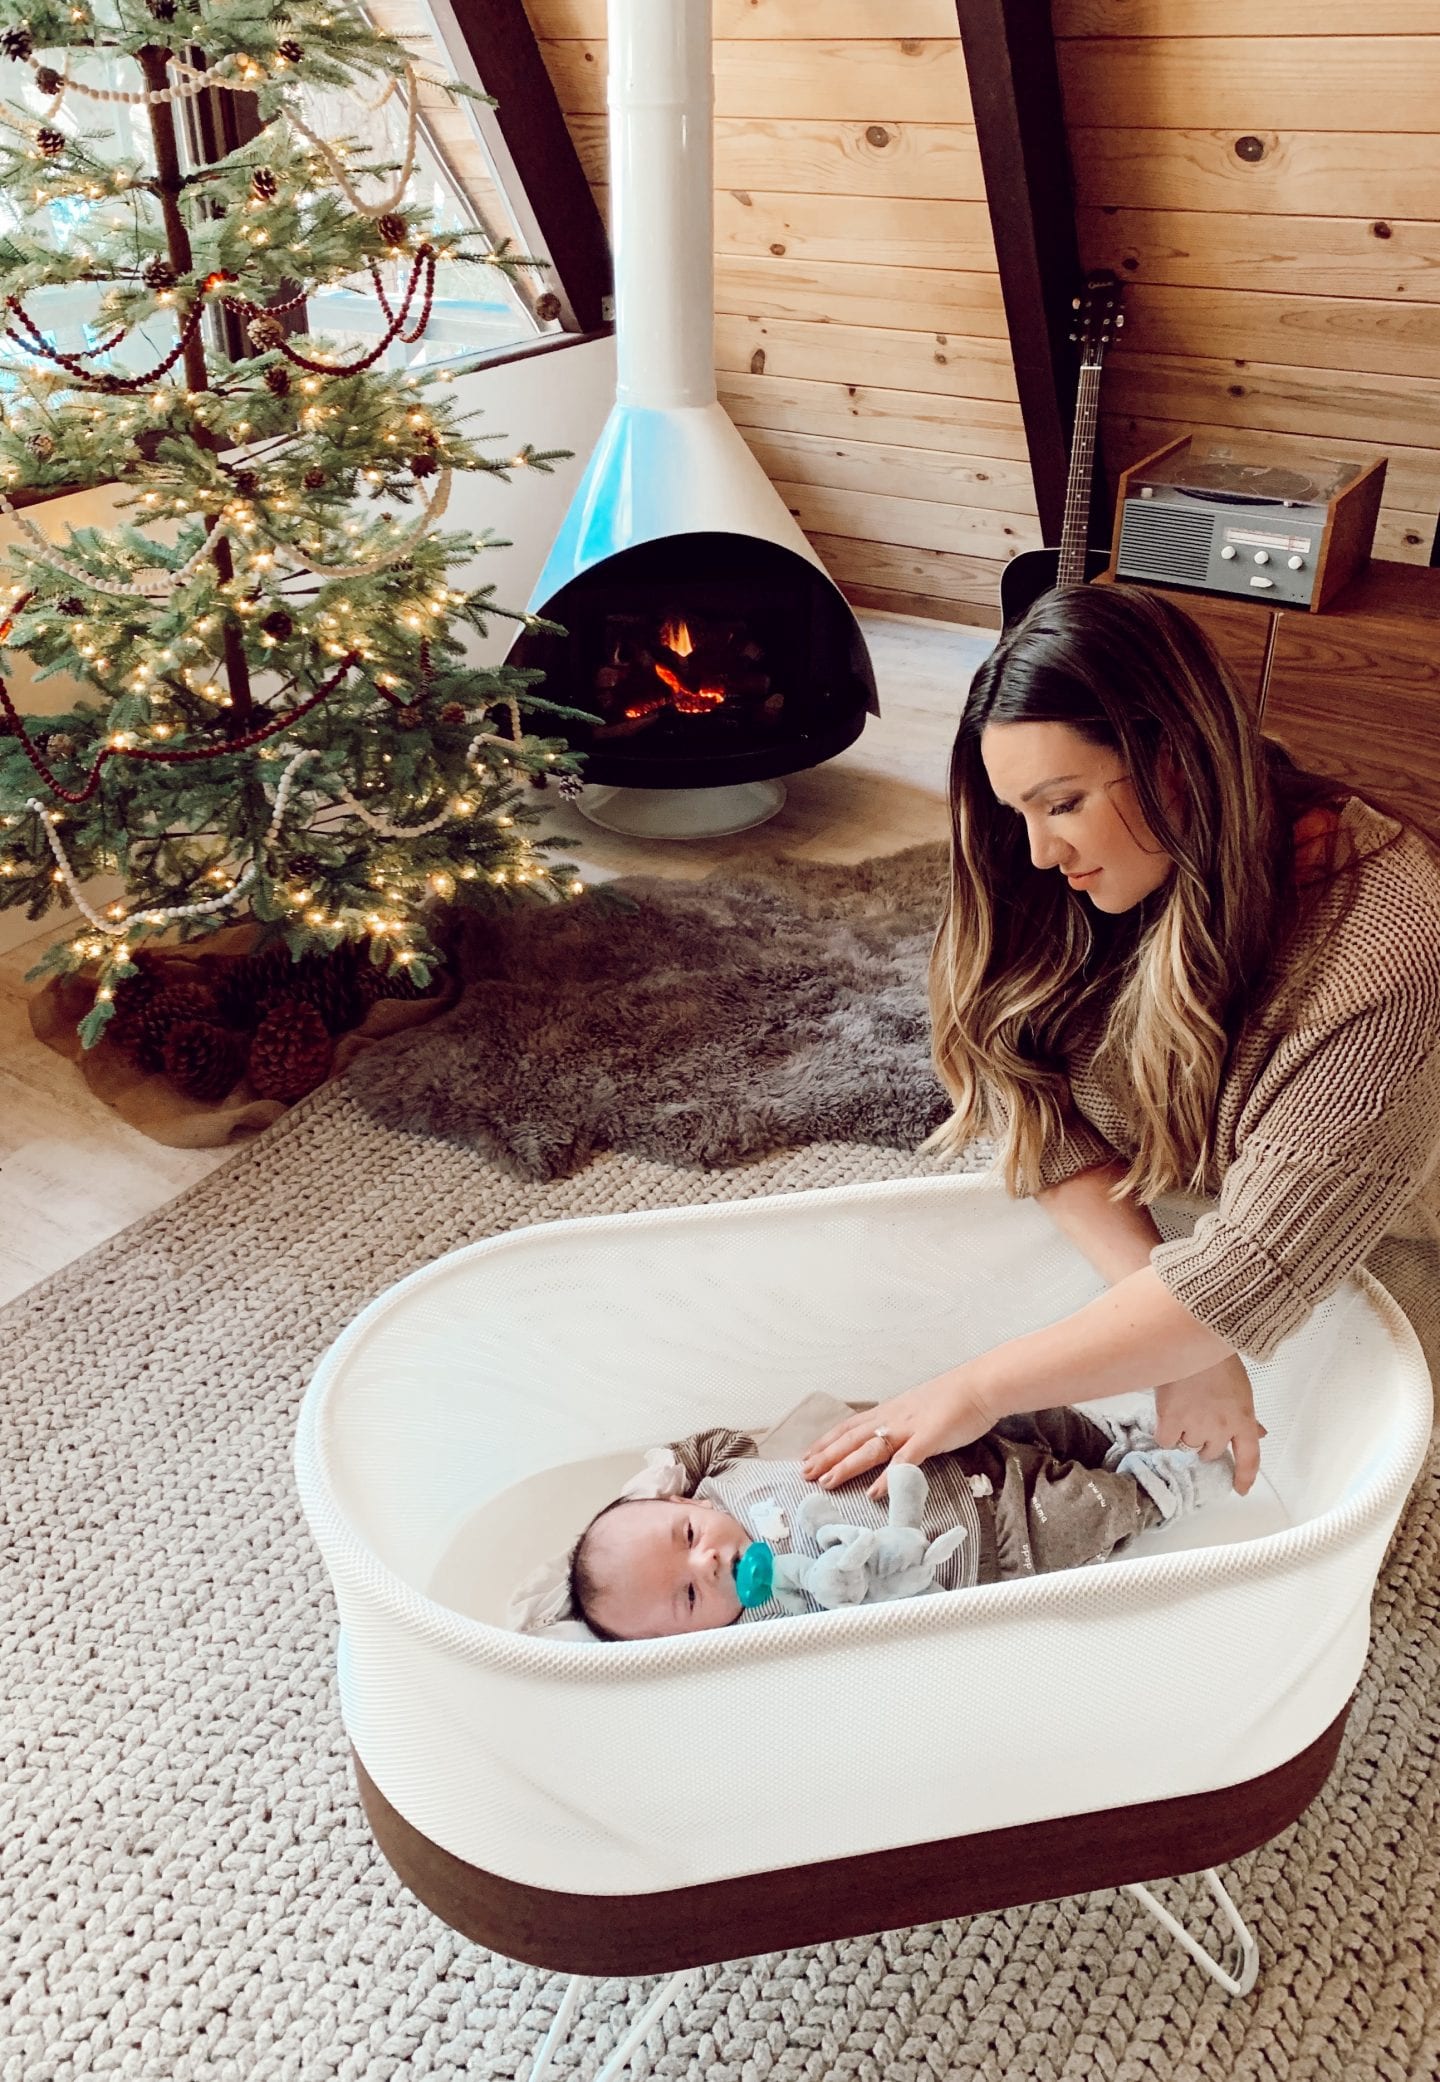 snoo review | Baby Snoo Bassinet Review by popular San Francisco life and style blog, Just Add Glam: image of a woman looking at her baby in a Snoo bassinet. 